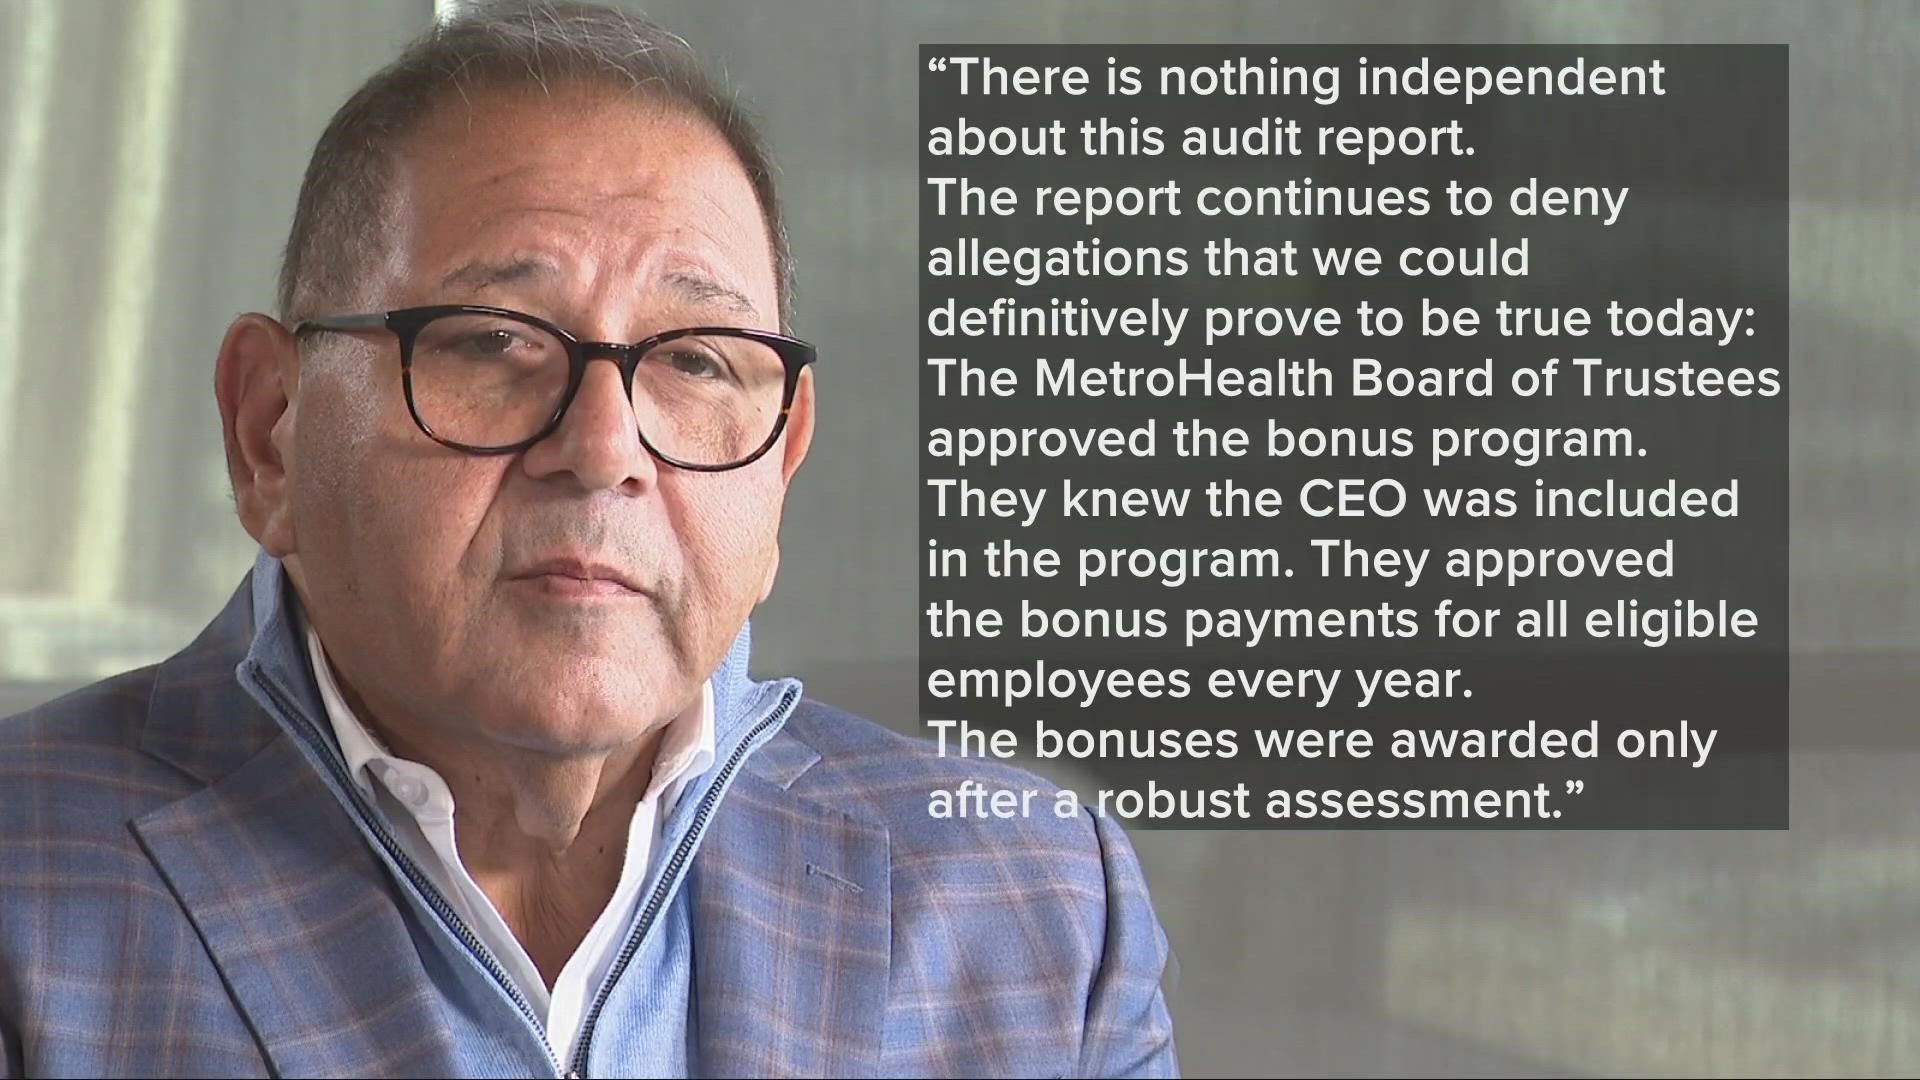 Boutros was fired from MetroHealth last November amid claims he gave unauthorized bonuses to himself.